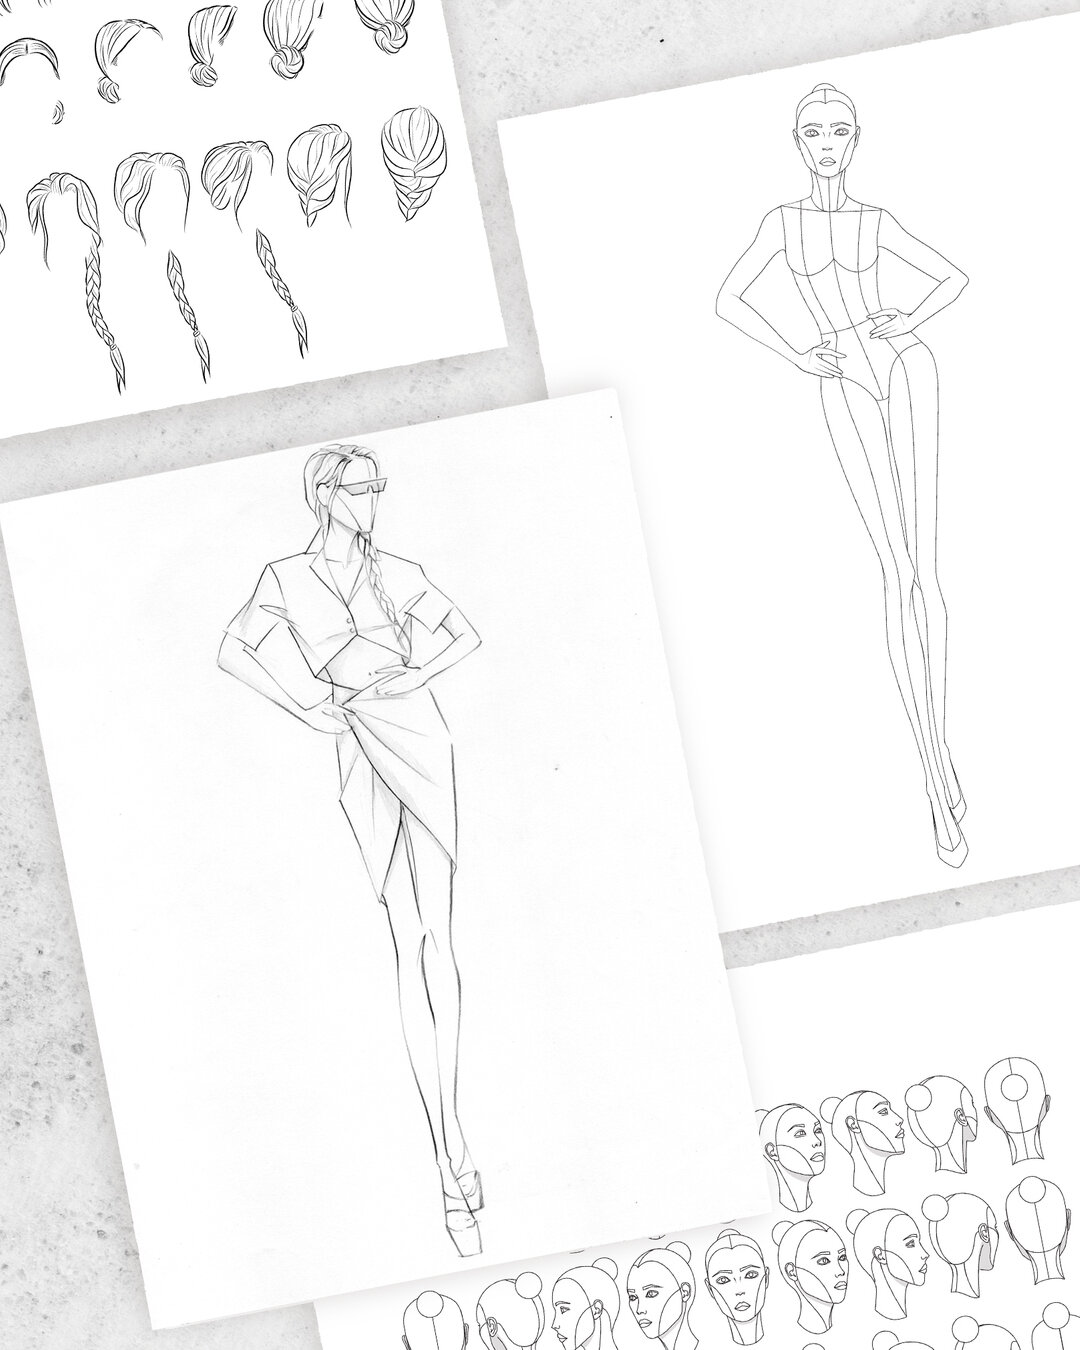 I customized this figure template from the Croquis Kit by changing the head position and adding a braid hairstyle. Check out the link in my bio to see all the templates included in this kit. ​​​​​​​​​.
.
.
.
.
.
.
.
.
.

#dressdesign #fashionillustra